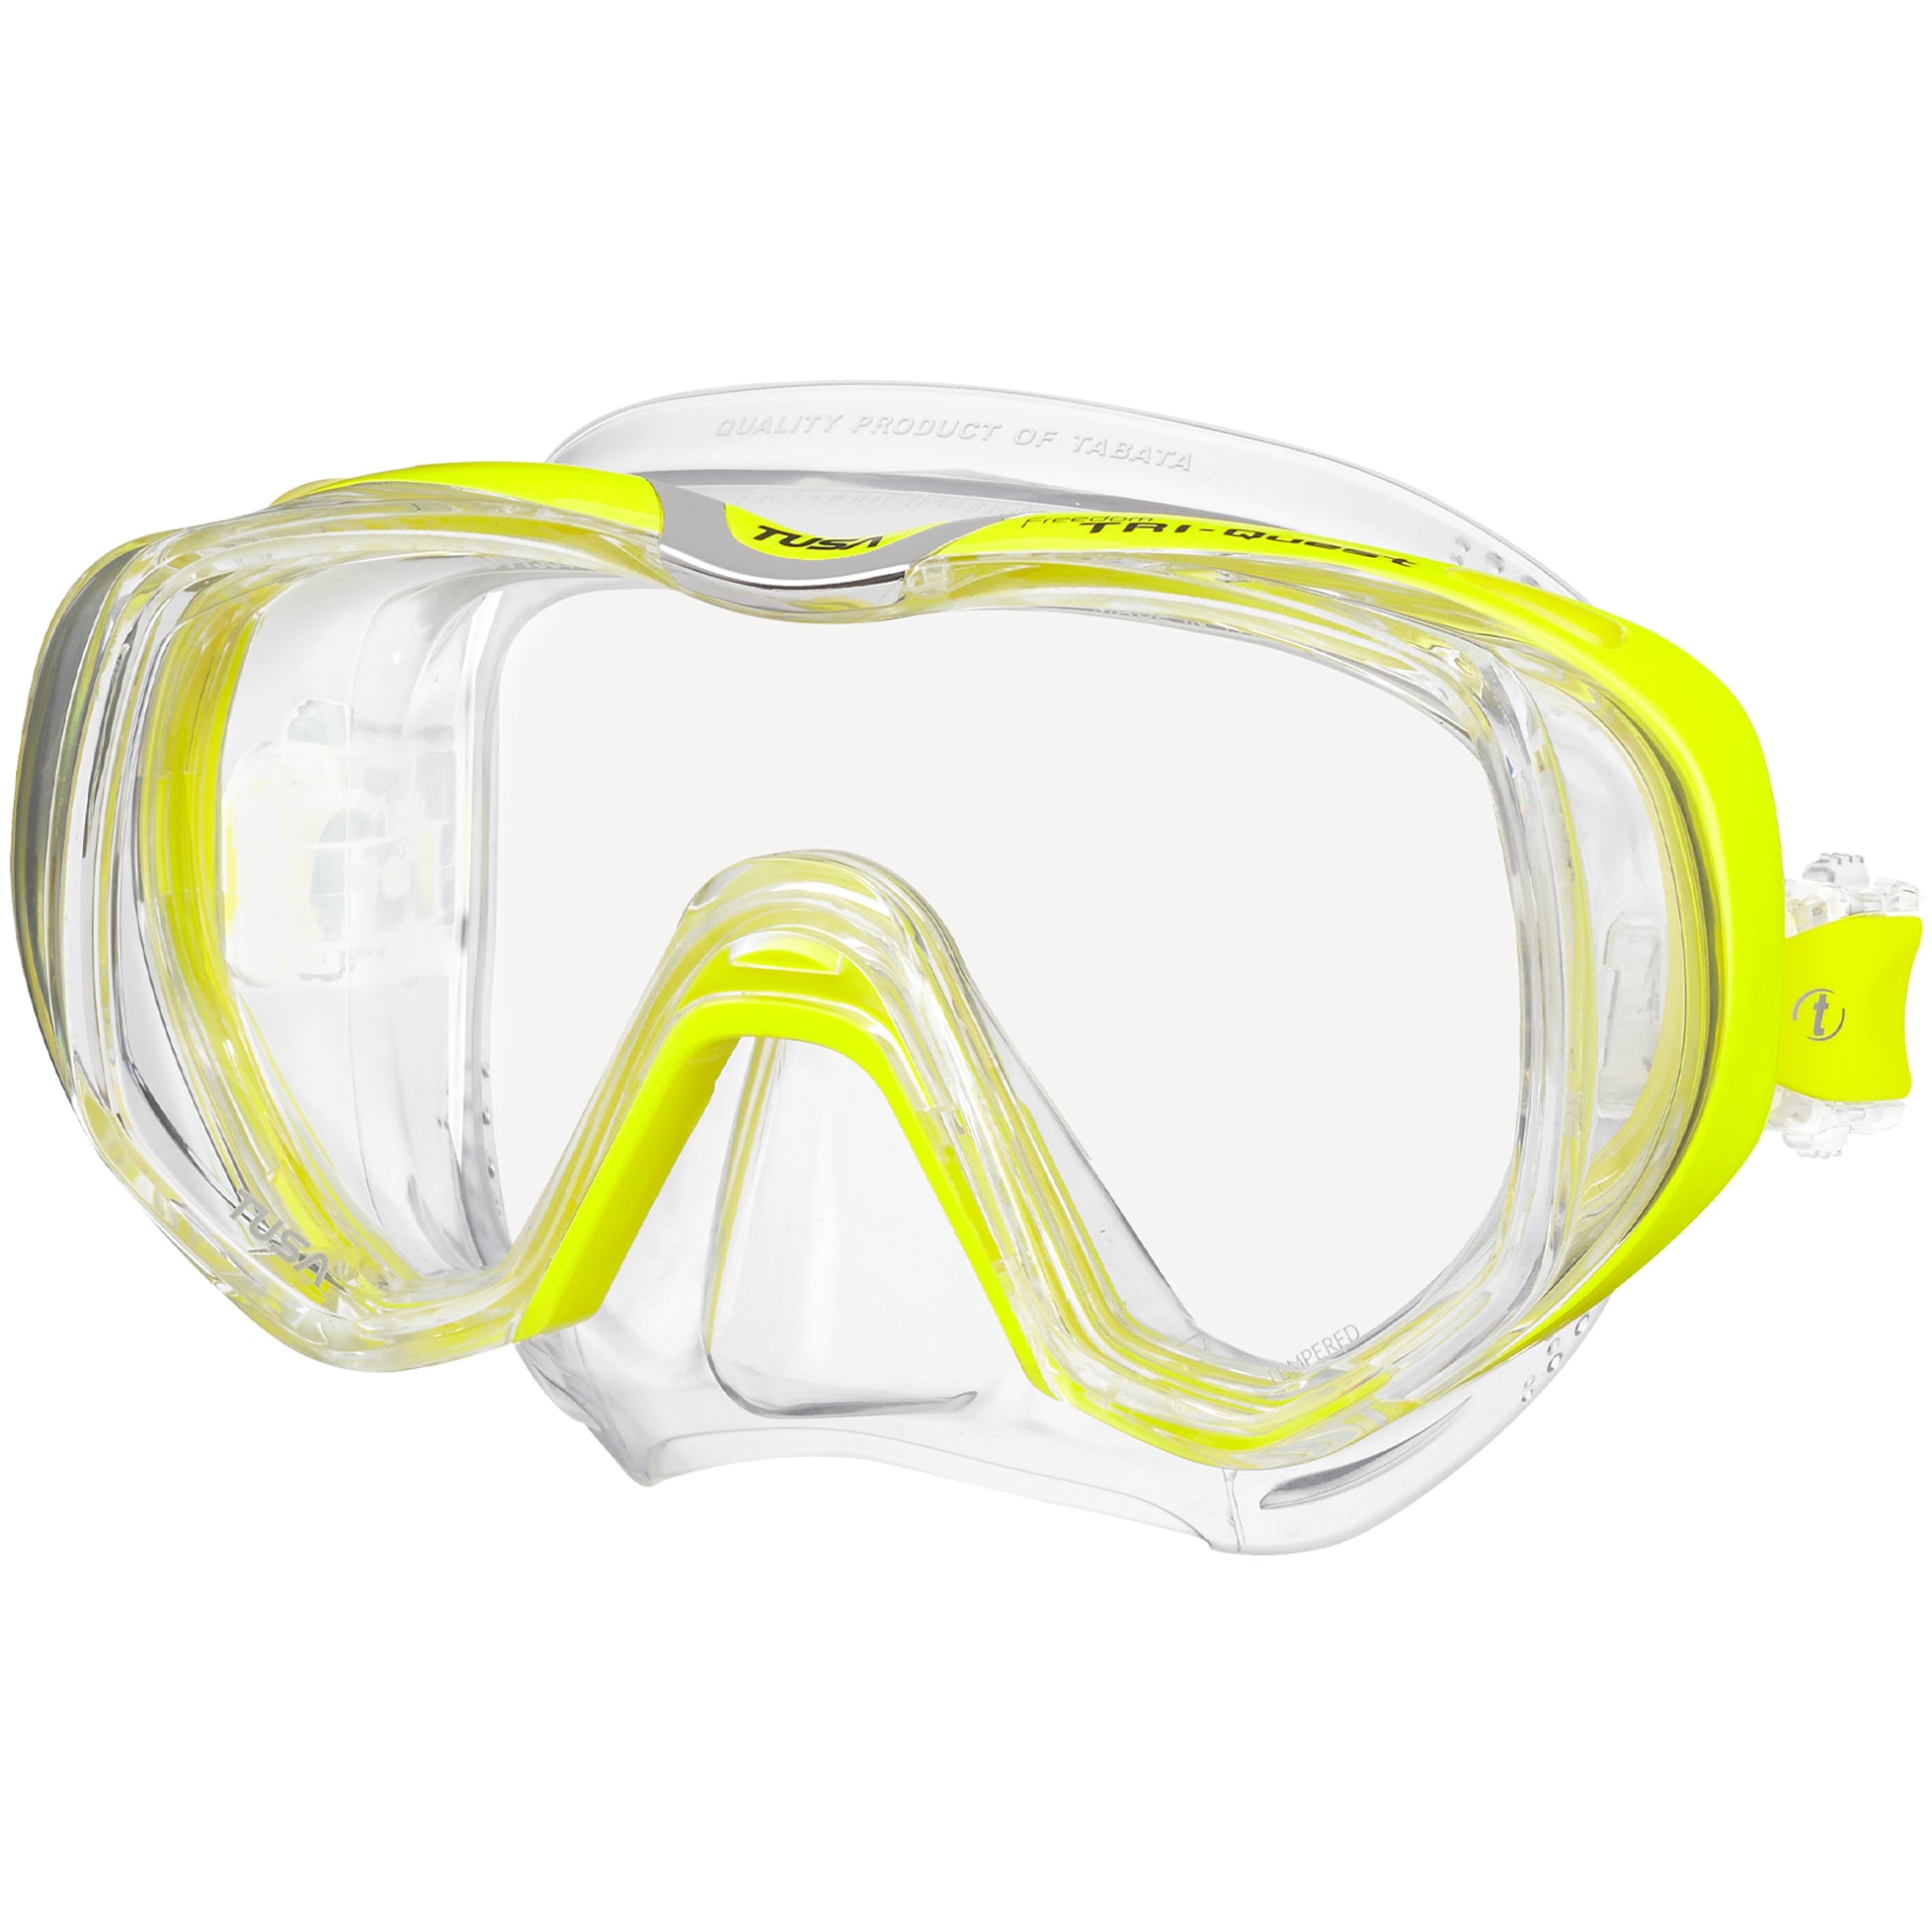 Tusa Freedom Tri Quest Mask - 3 window Dive Mask in Yellow